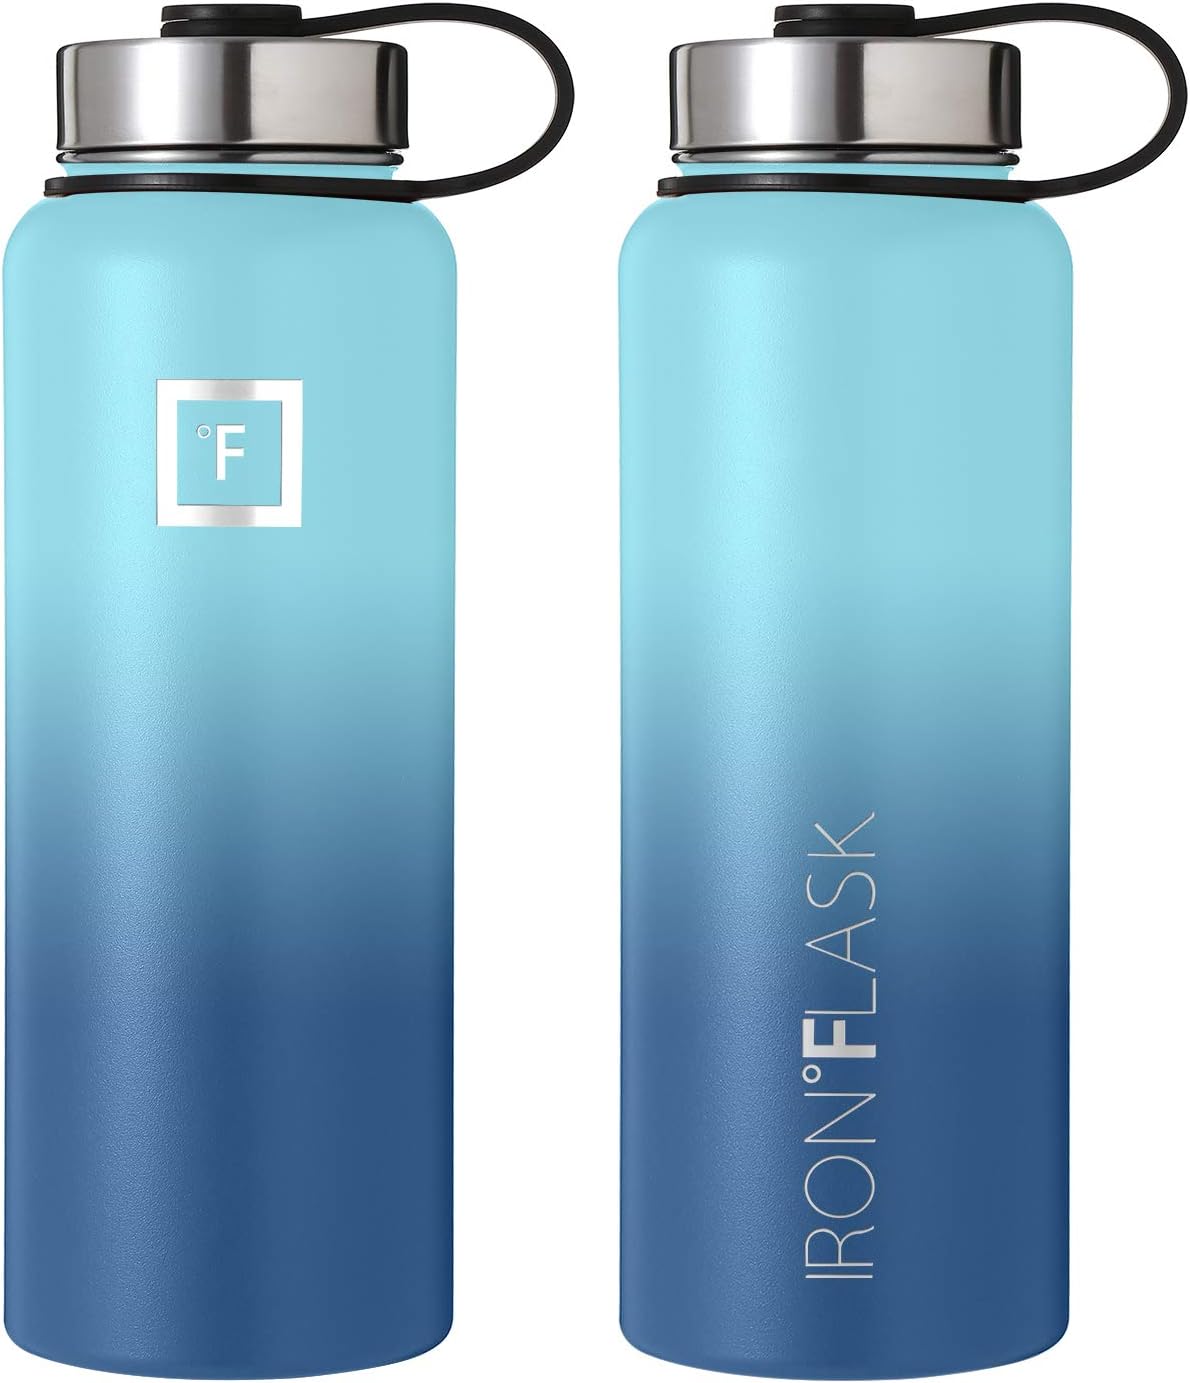 Zero Degree Stainless Steel Water Bottle with Leak Proof Lid 40oz Blue Vacuum Insulated Double Wall Sport Bottle Keeps Drinks Cold for 24 Hours